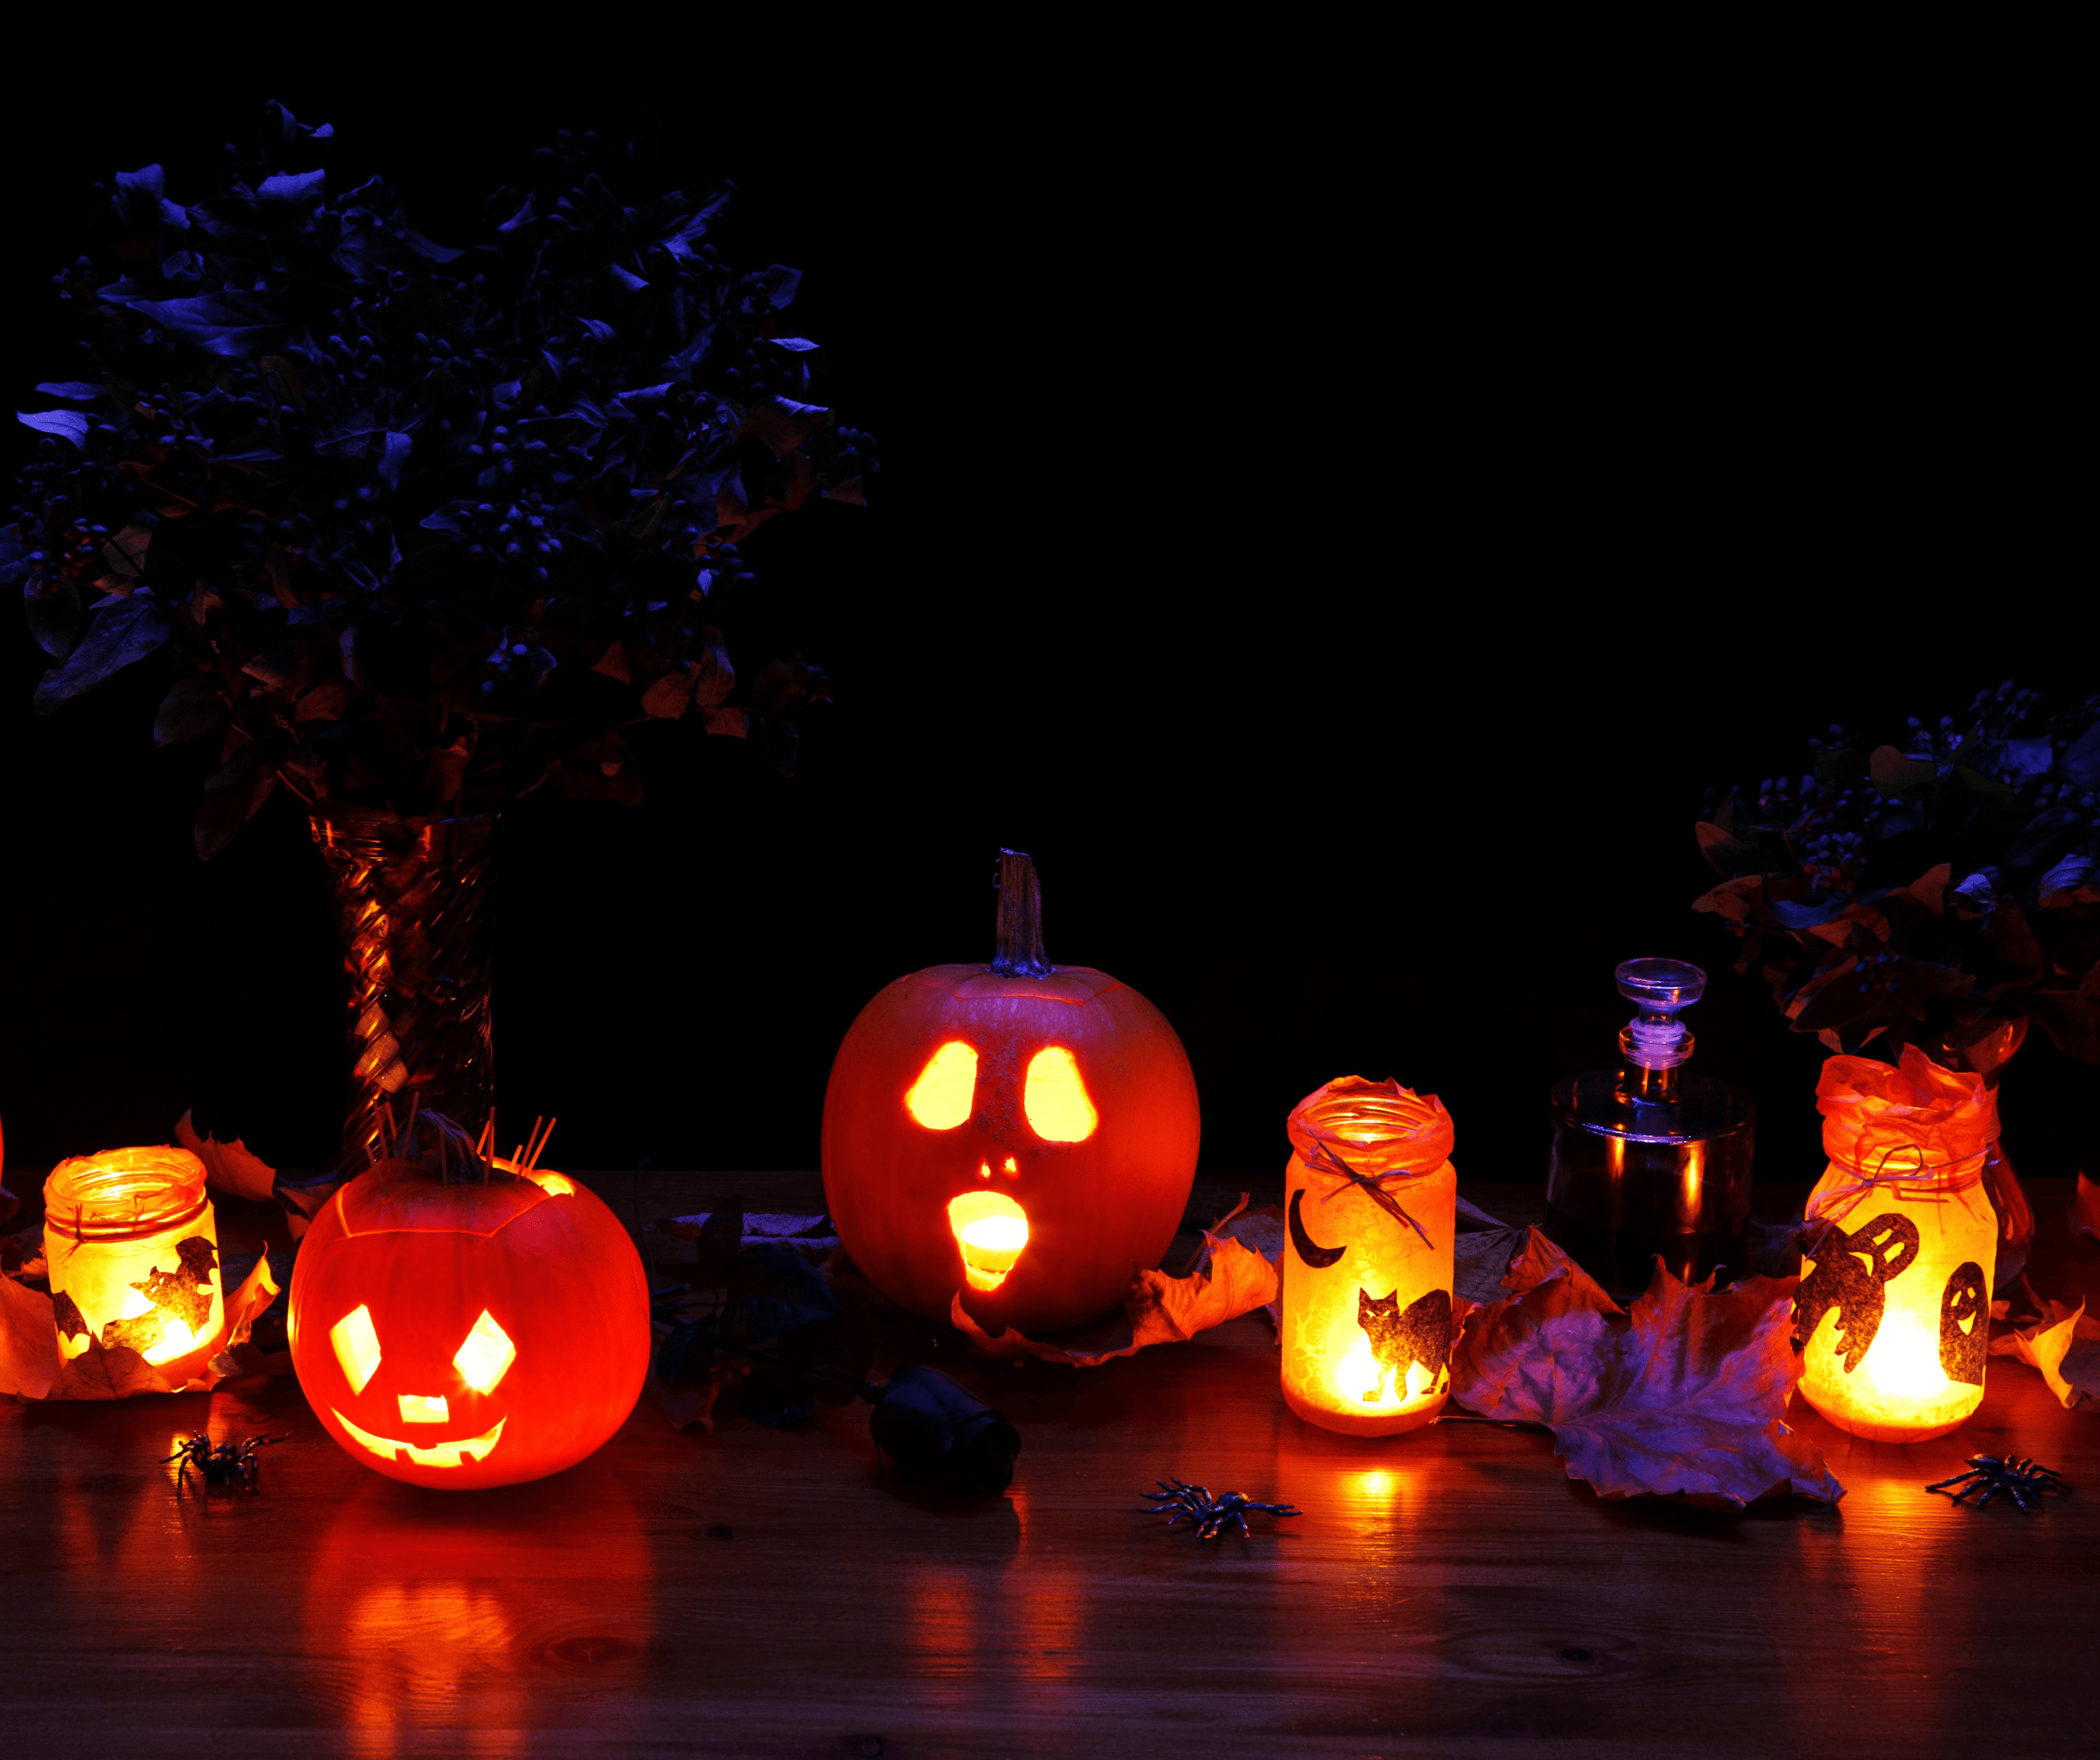 A stock image of Halloween decor - start your search on Share to Buy today!